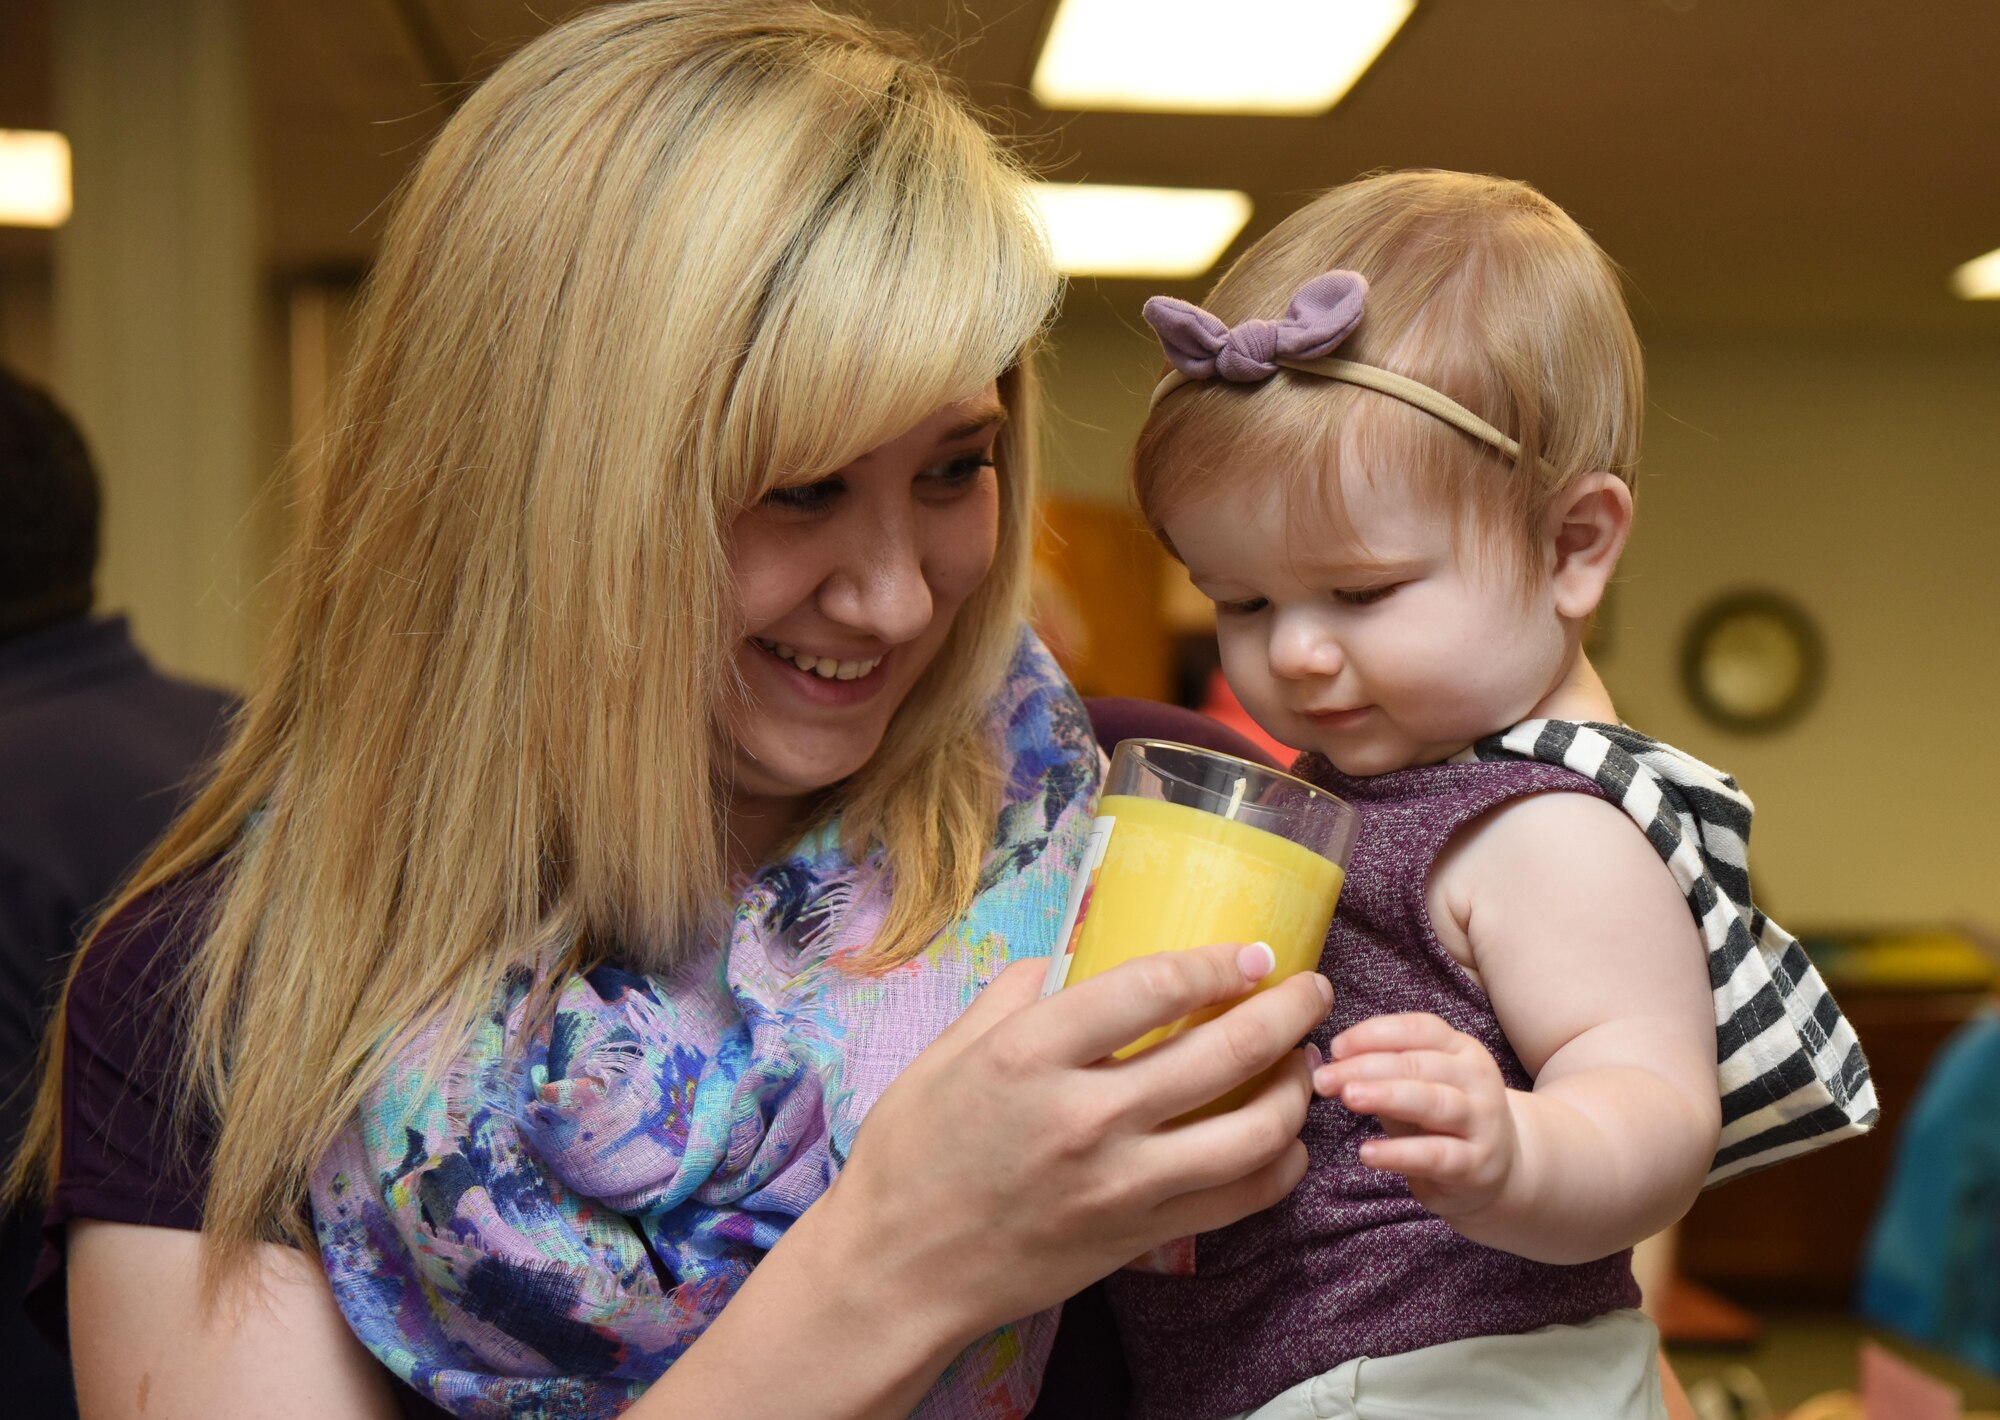 Melissa Davis, spouse of Airman Daniel Davis, 336th Training Squadron student, holds a candle to her daughter, Presley, to smell during Pamper Me Day at the Sablich Center May 4, 2017, on Keesler Air Force Base, Miss. Keesler’s Airman and Family Readiness Center has hosted the event for the past 13 years, offering spouses free manicures, make-up styling tips and information and business booths. (U.S. Air Force photo by Kemberly Groue)